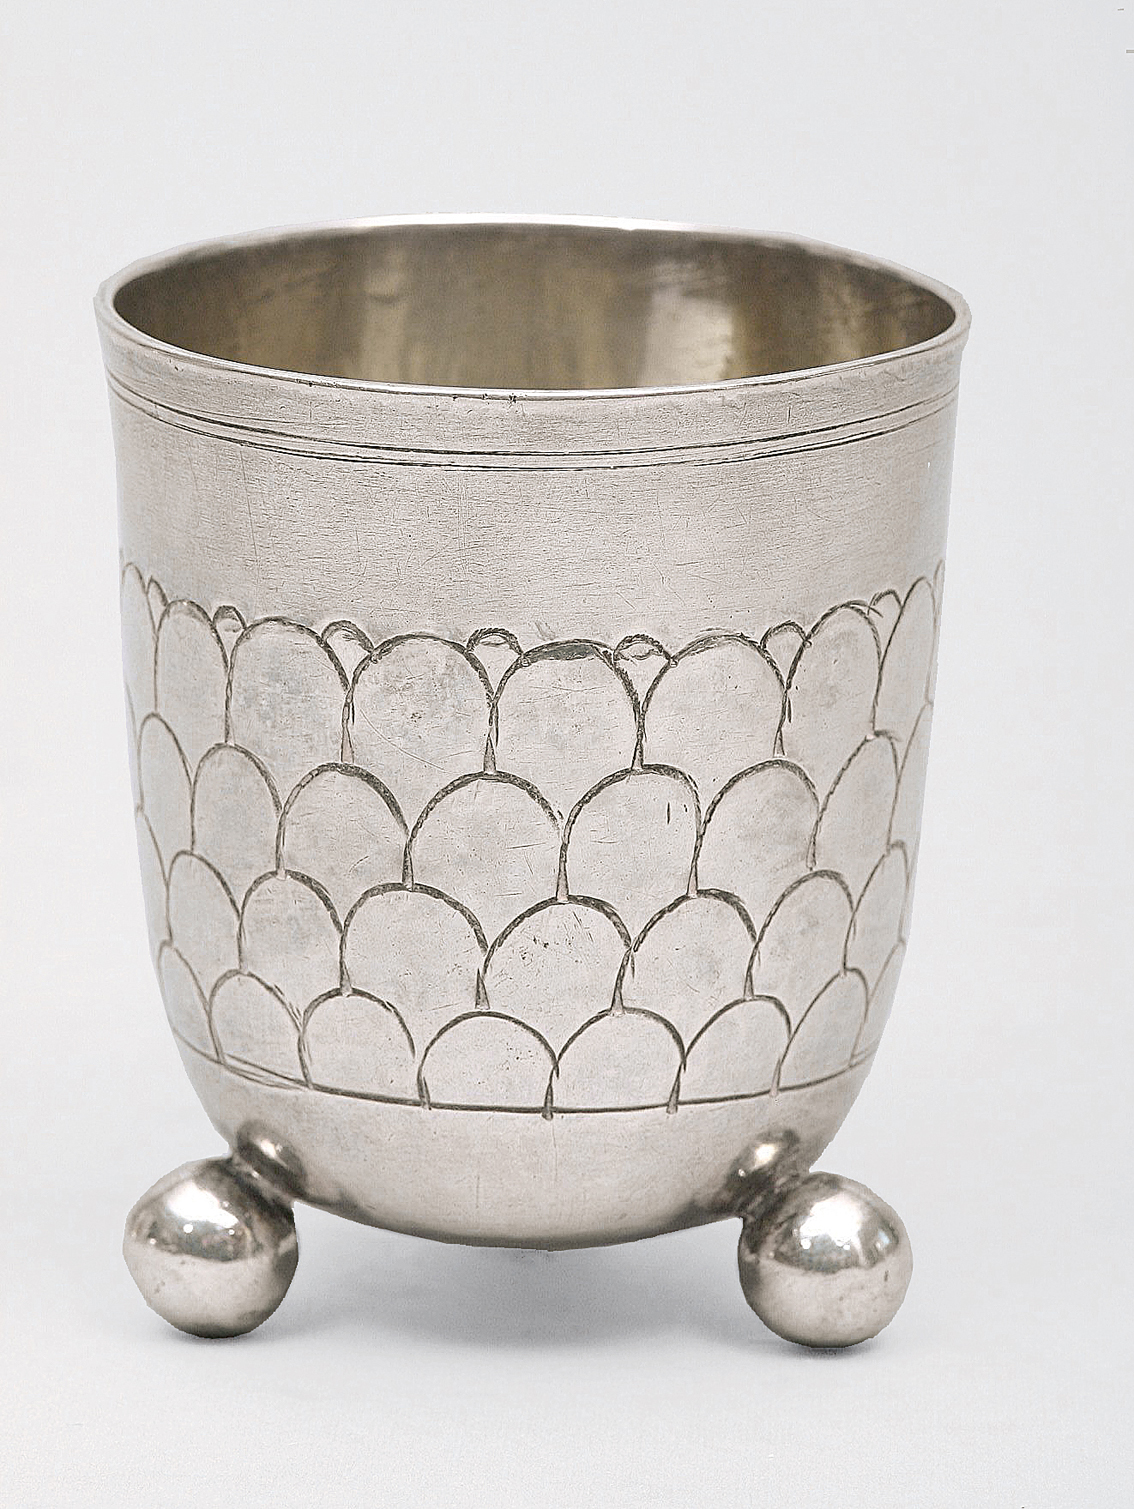 A rare cup with scale-shaped pattern